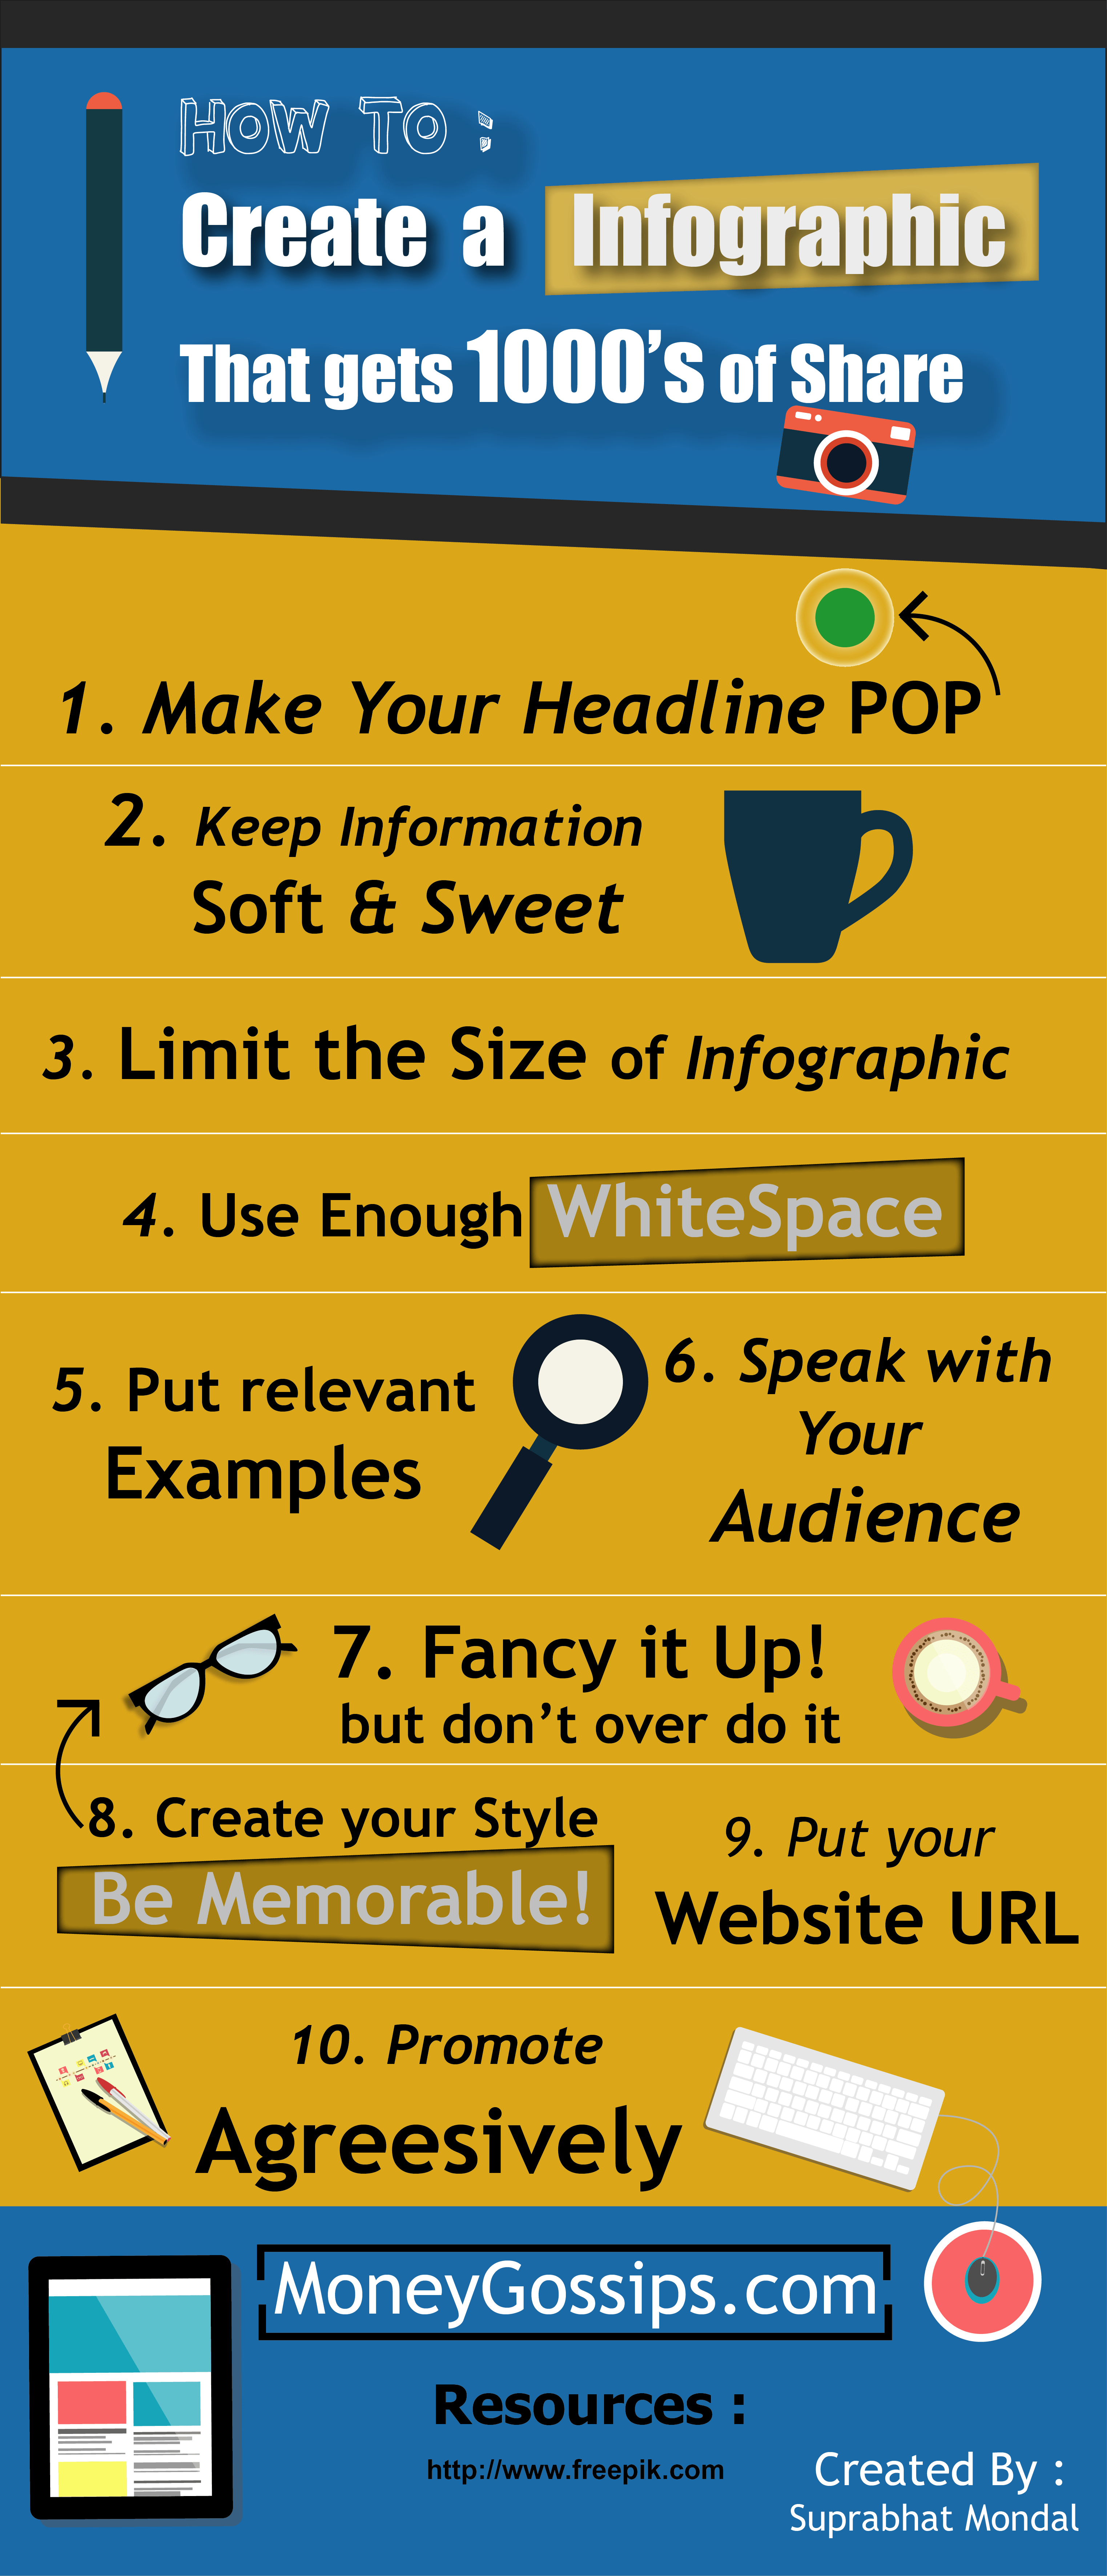 How to Create an Infographic in 5 Minutes | Piktochart